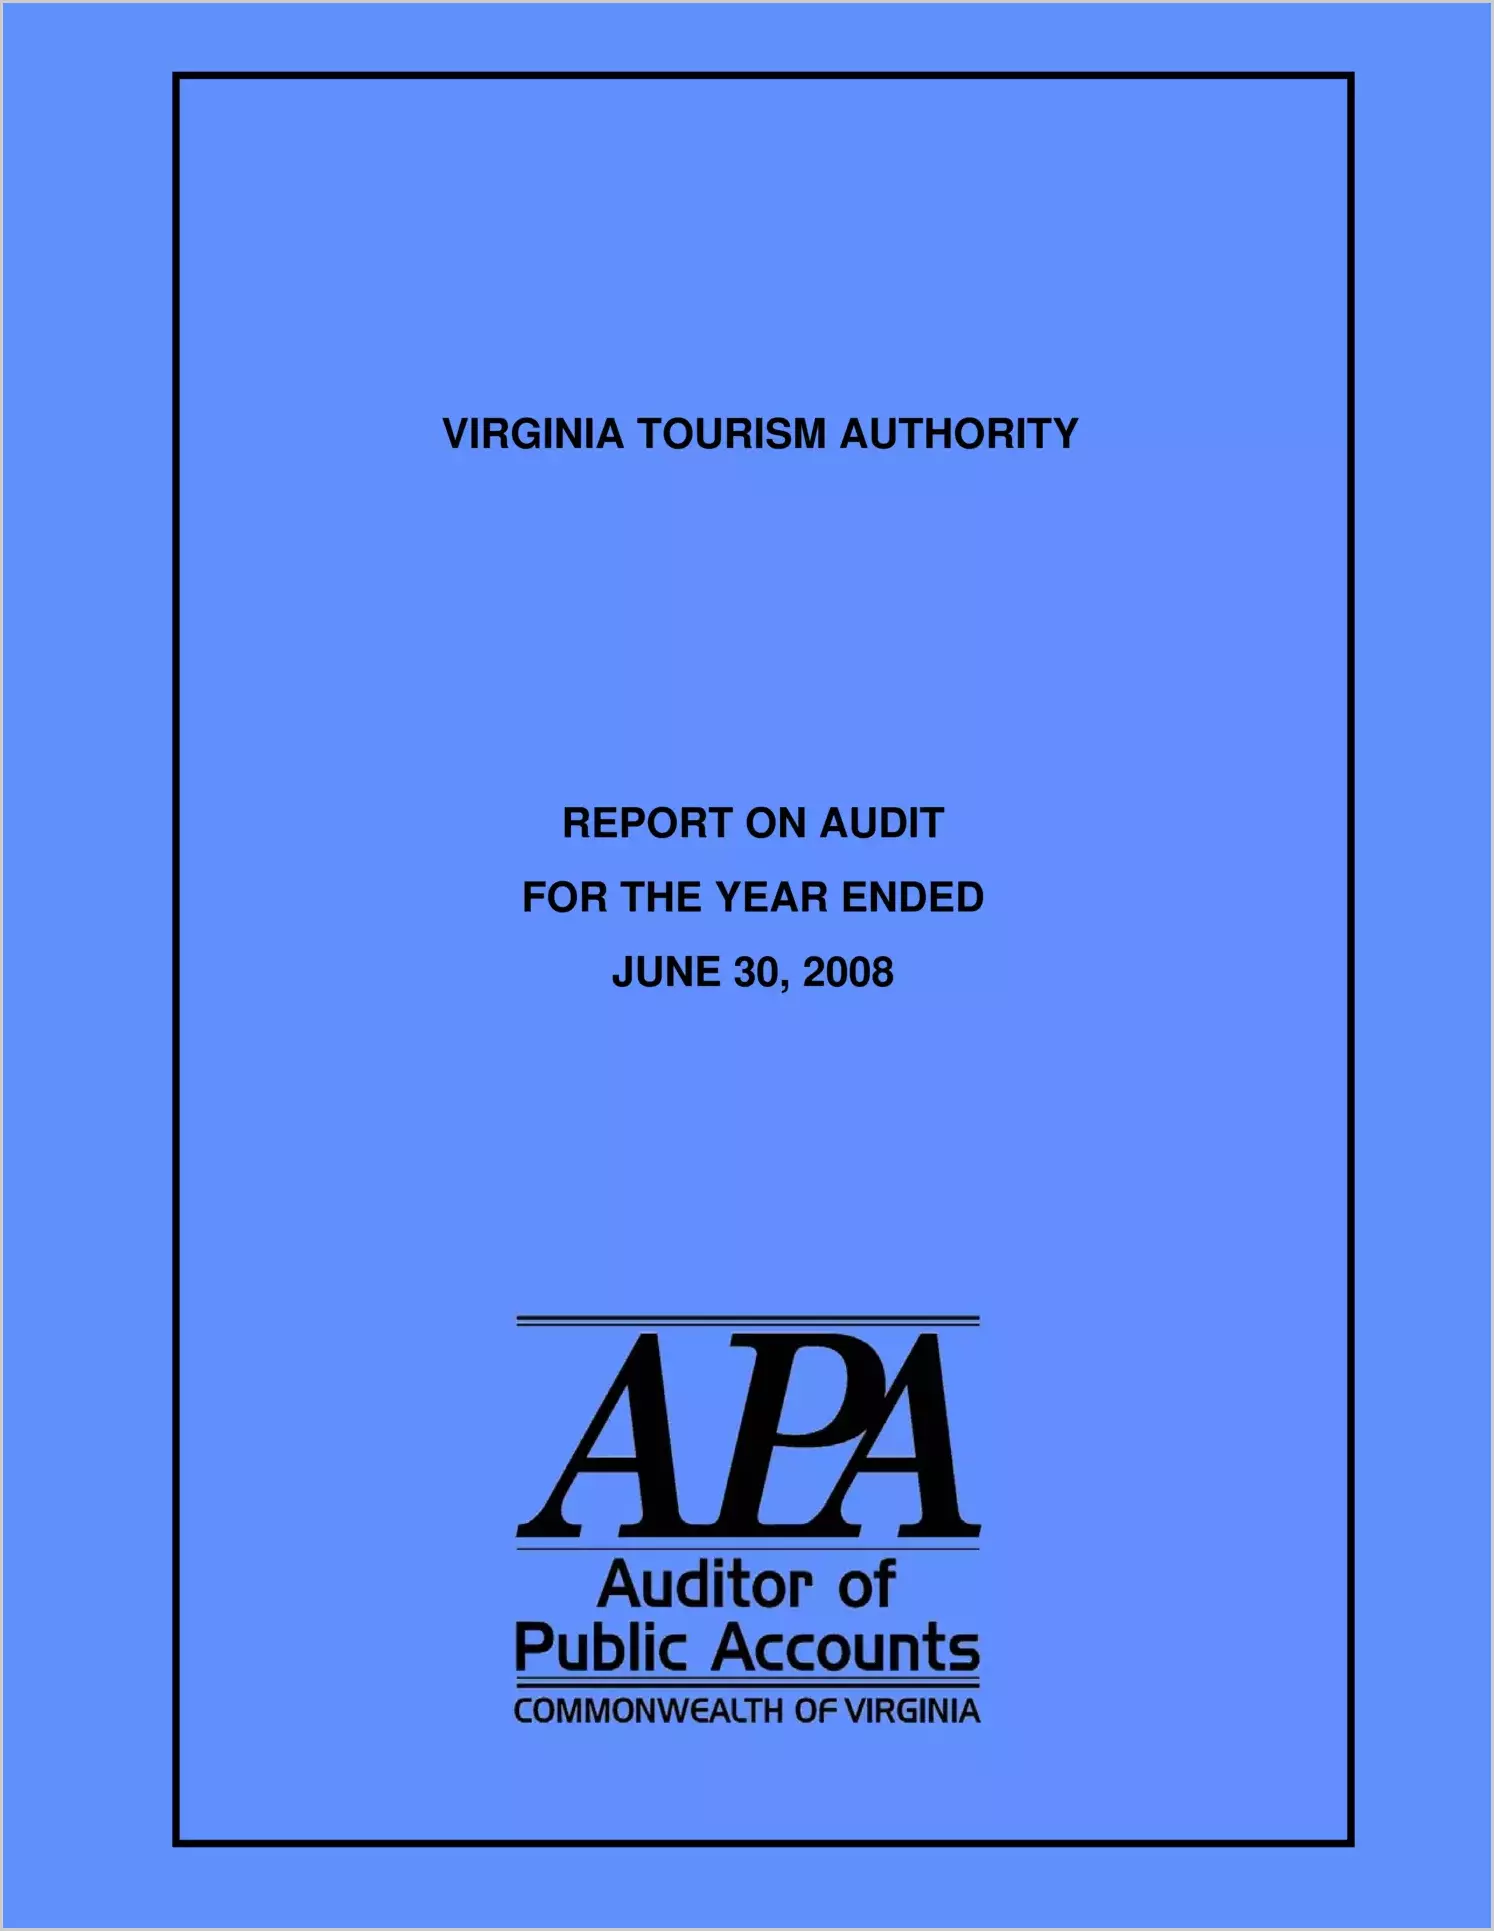 Virginia Tourism Authority for the year ended June 30, 2008